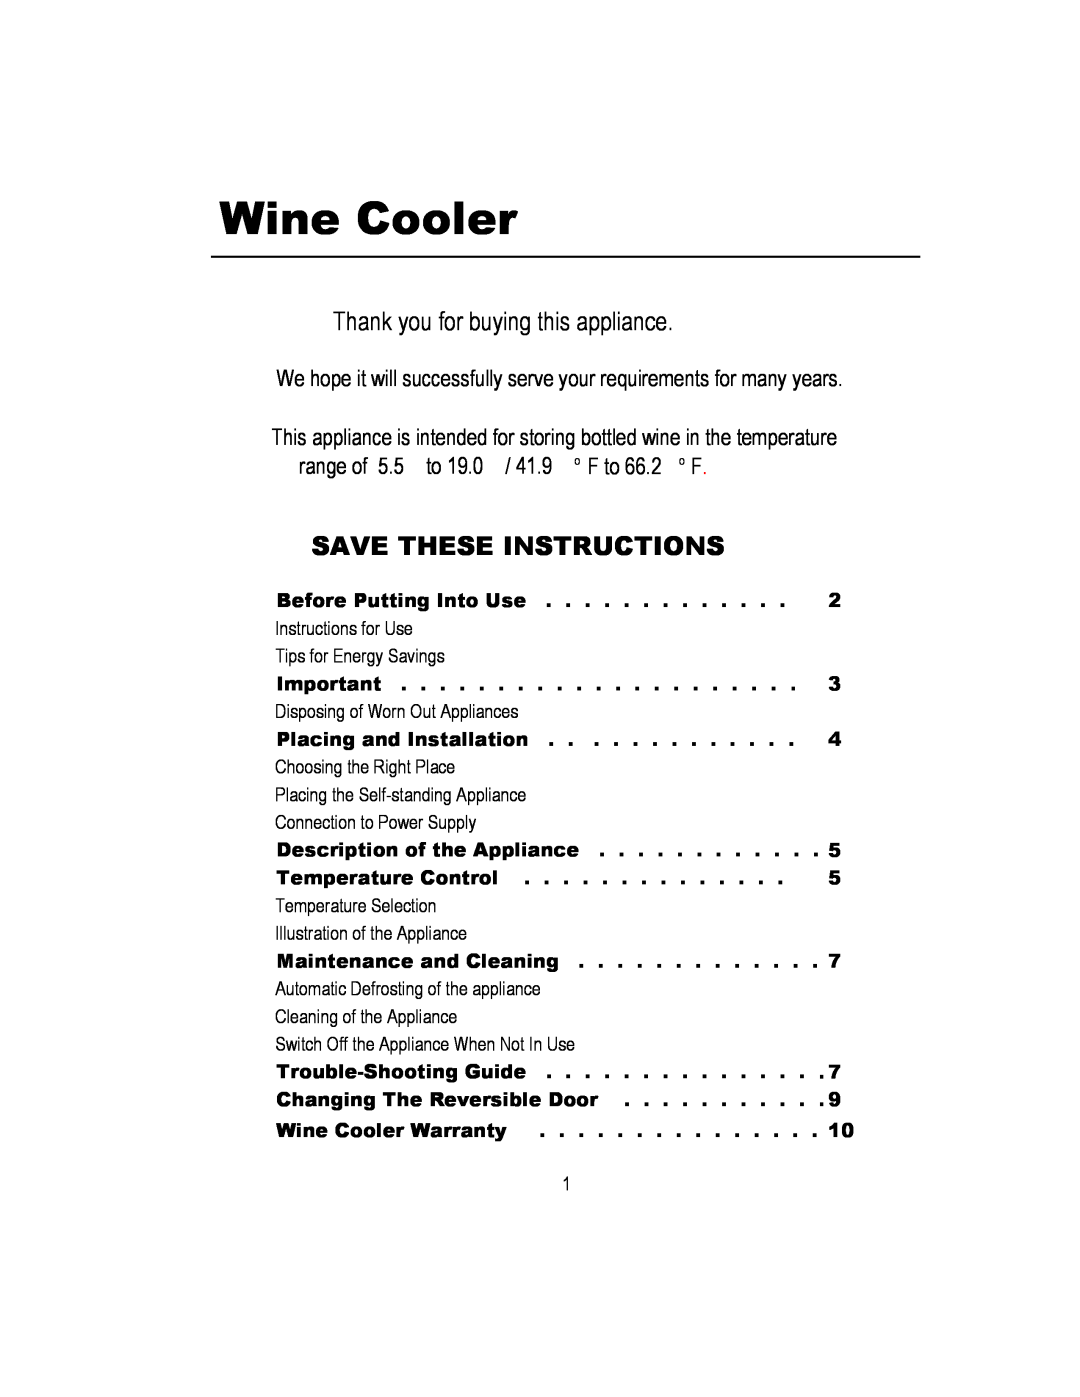 Magic Chef MCWC52B warranty Thank you for buying this appliance, Save These Instructions, Wine Cooler 